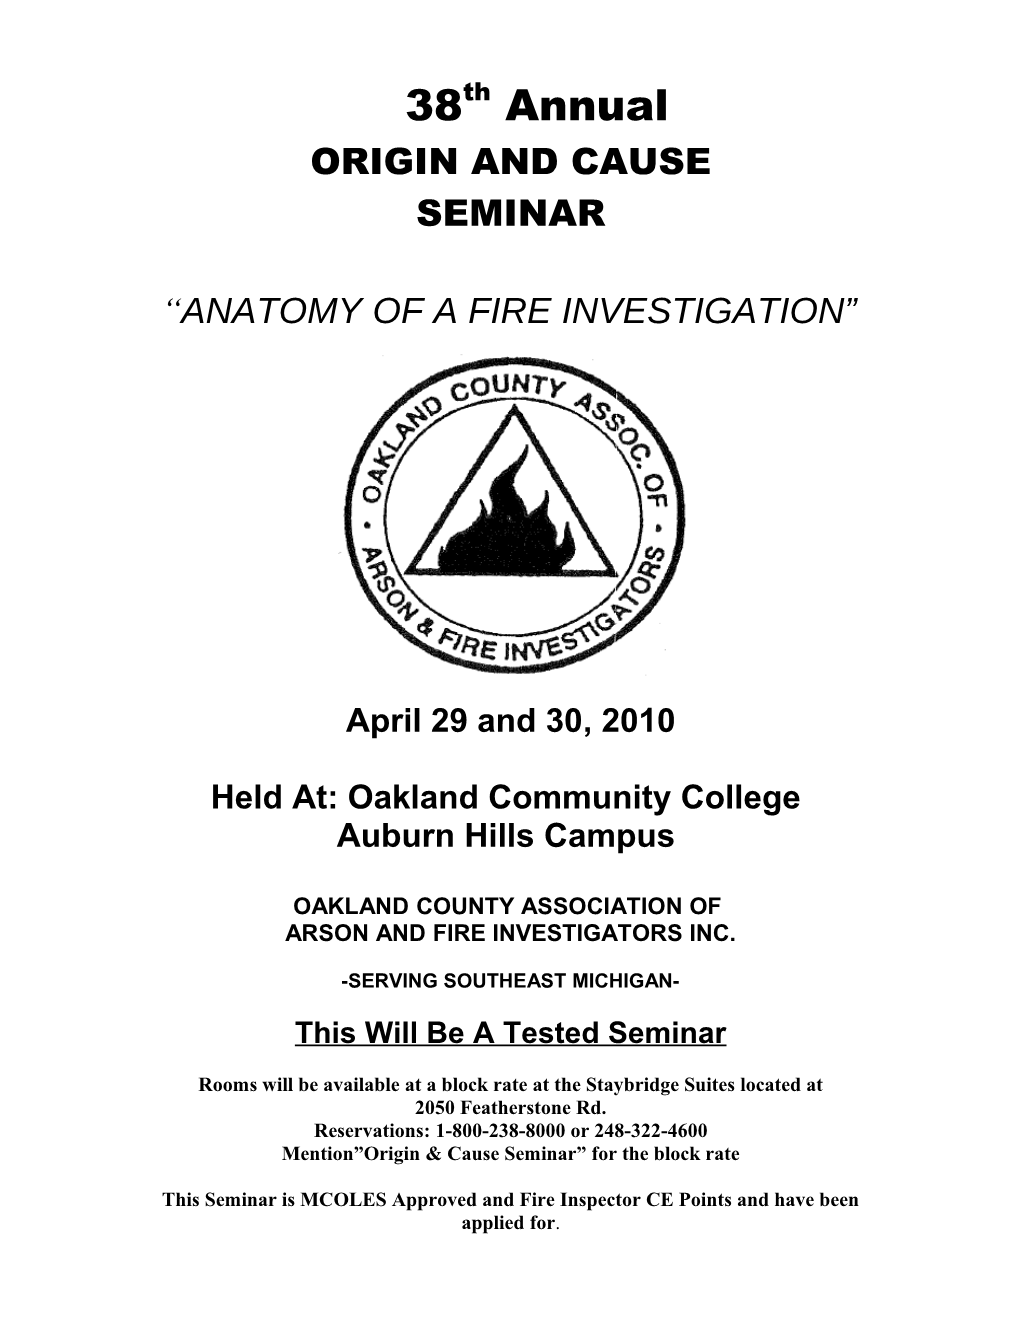 Held At: Oakland Community College